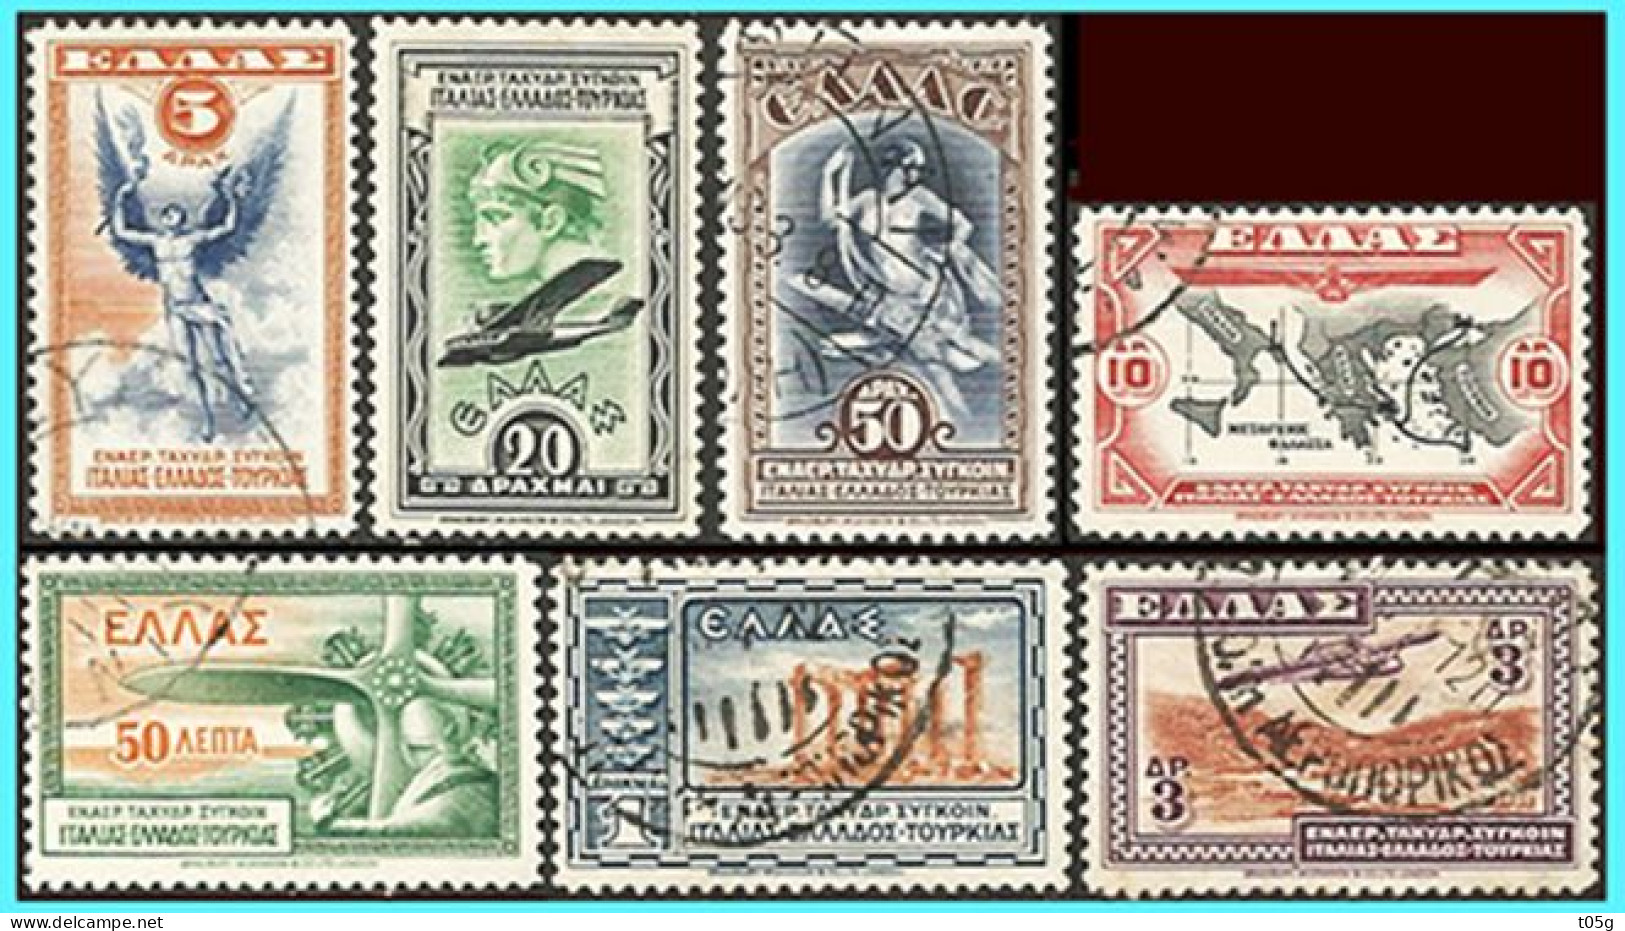 GREECE- GRECE- HELLAS 1933:  "Aeroespresso" Airpost Stamp  Compl. set used - Used Stamps